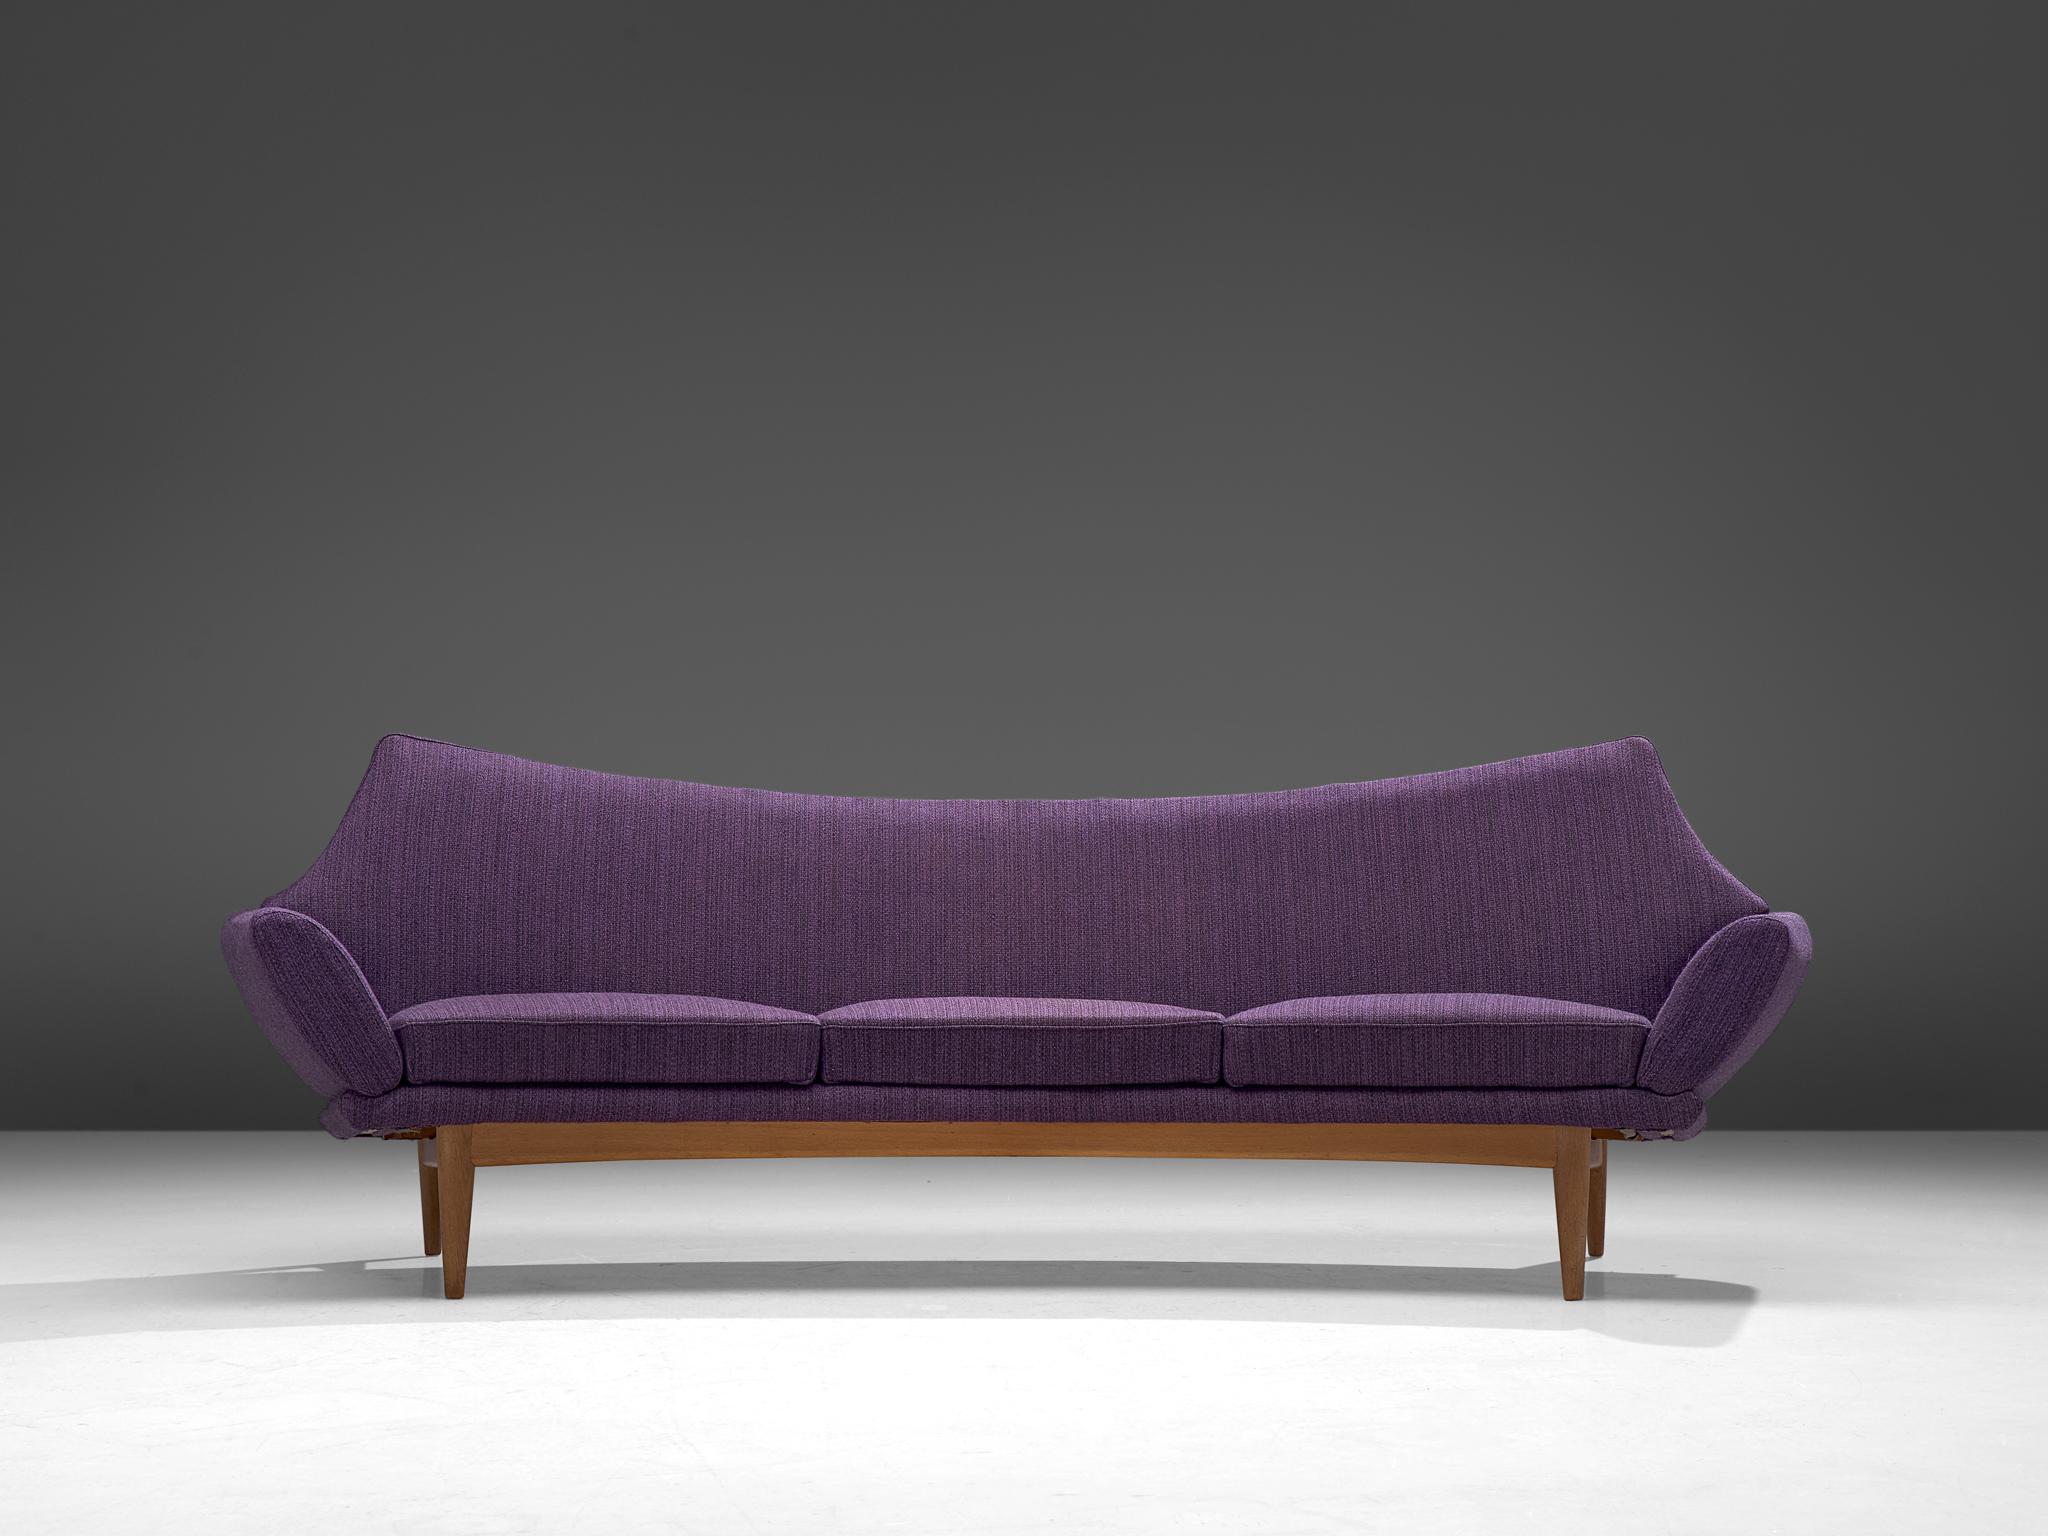 Johannes Andersen for Trensums Fatöljfabrik, sofa, fabric and beech, Sweden, 1960s

Swedish three-seat sofa designed by Johannes Andersen in the 1960s. The curved sofa features a striking design with almost complete absence of straight lines. The